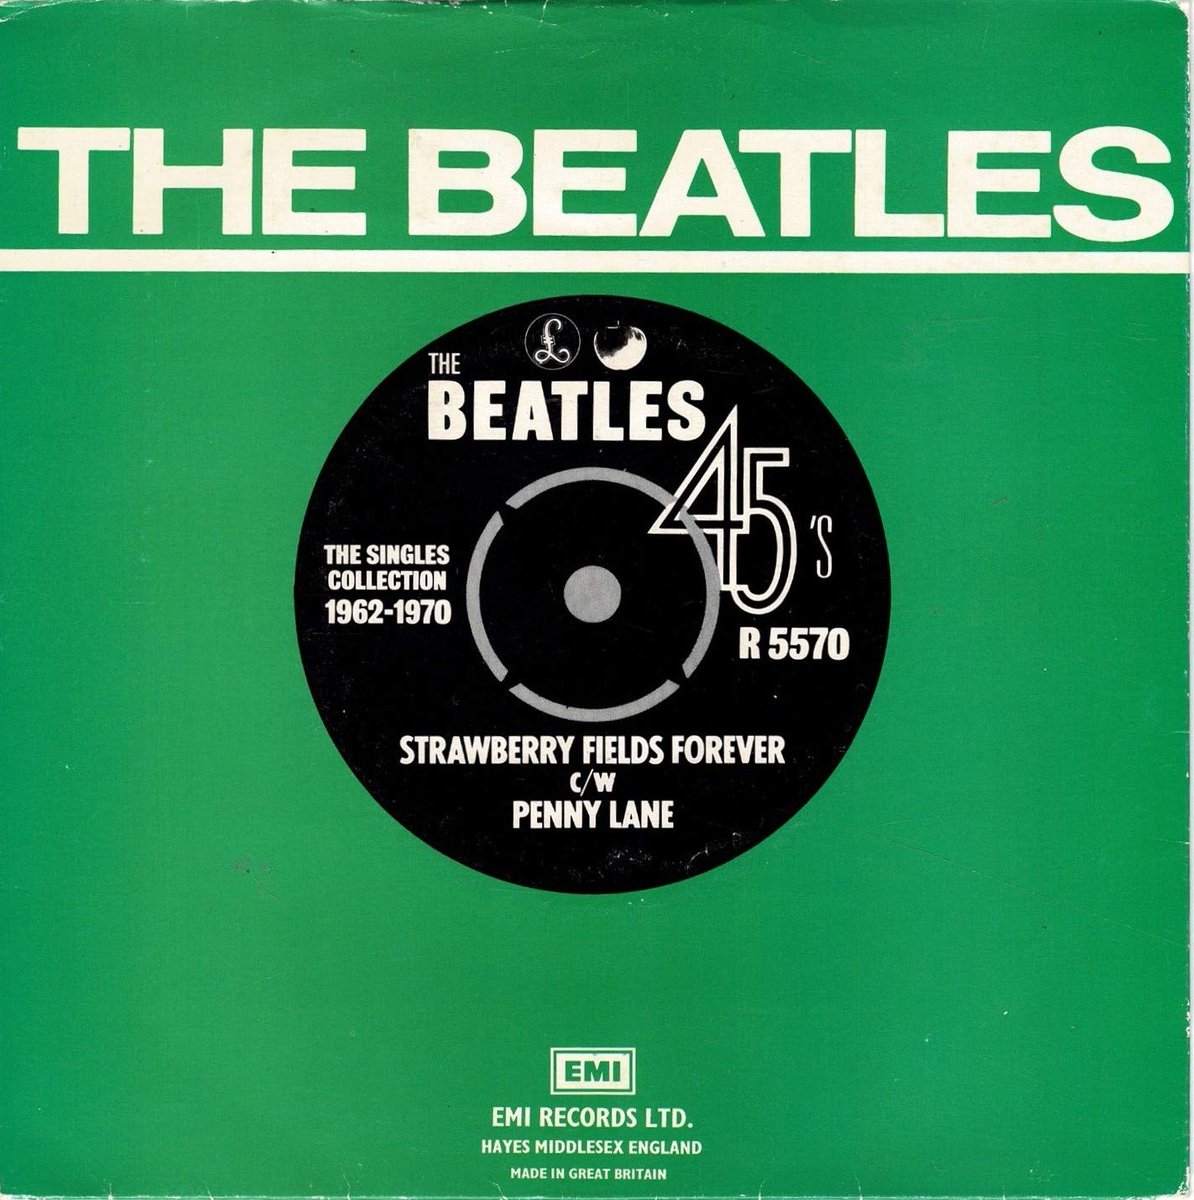 sgt pepper was about their childhood.this theme is most prominent in the sgt pepper singles: strawberry fields and penny lane. both songs are literally about their childhood in liverpool. john and paul reminiscing about better times.